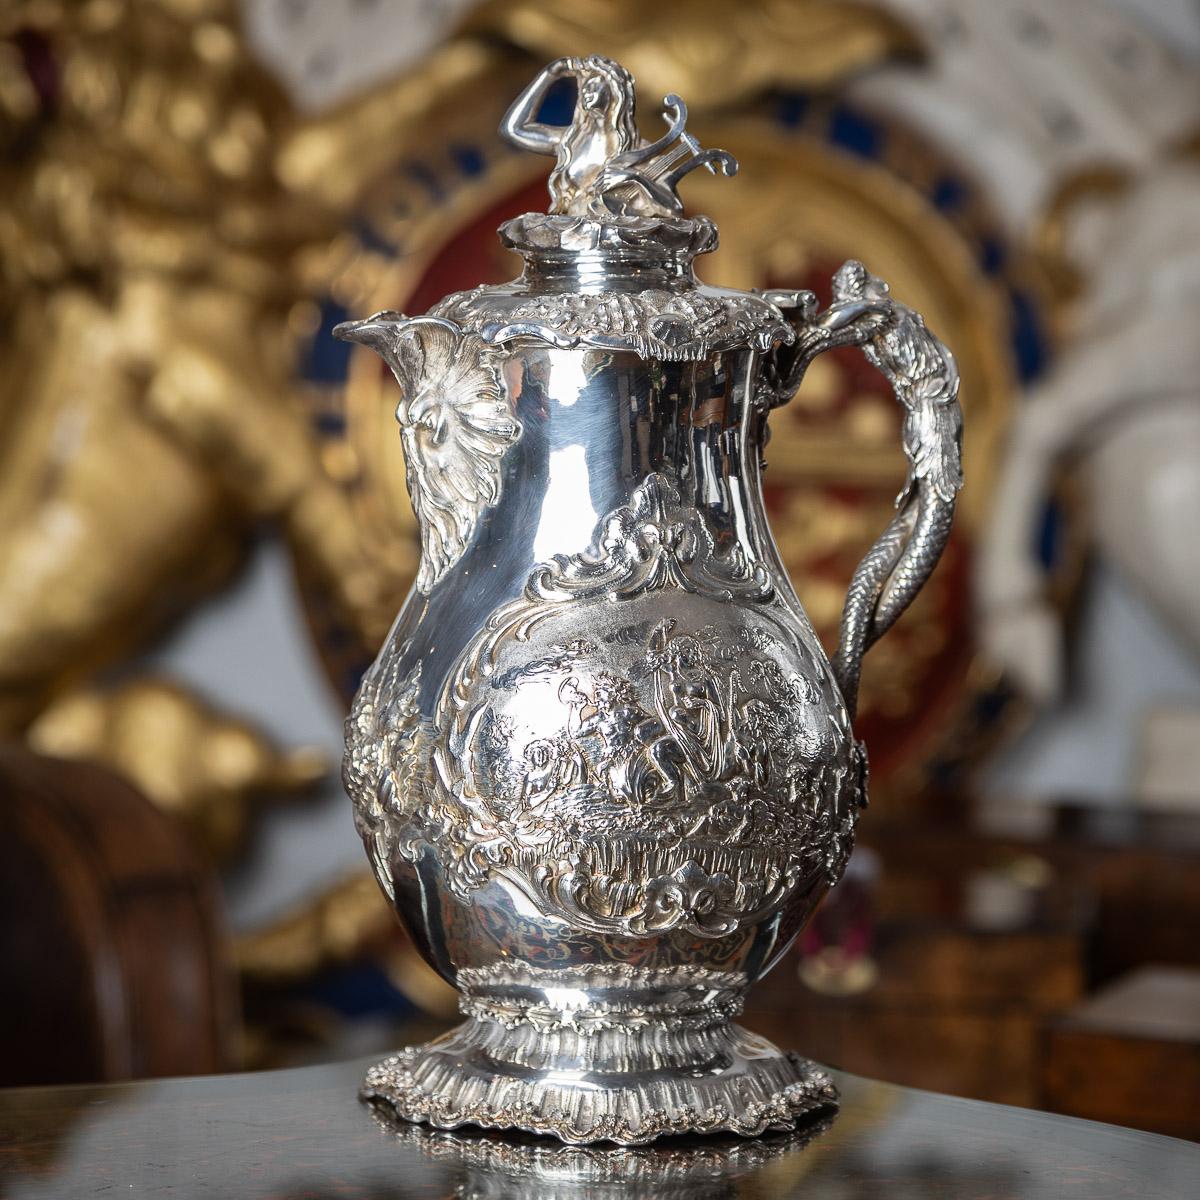 Antique mid-19th Century Victorian impressively large solid silver water jug, the generously adorned body features intricate relief depicting nautical scenes, elaborate scrolls, and mythical dolphins. Standing proudly on a spreading foot embellished